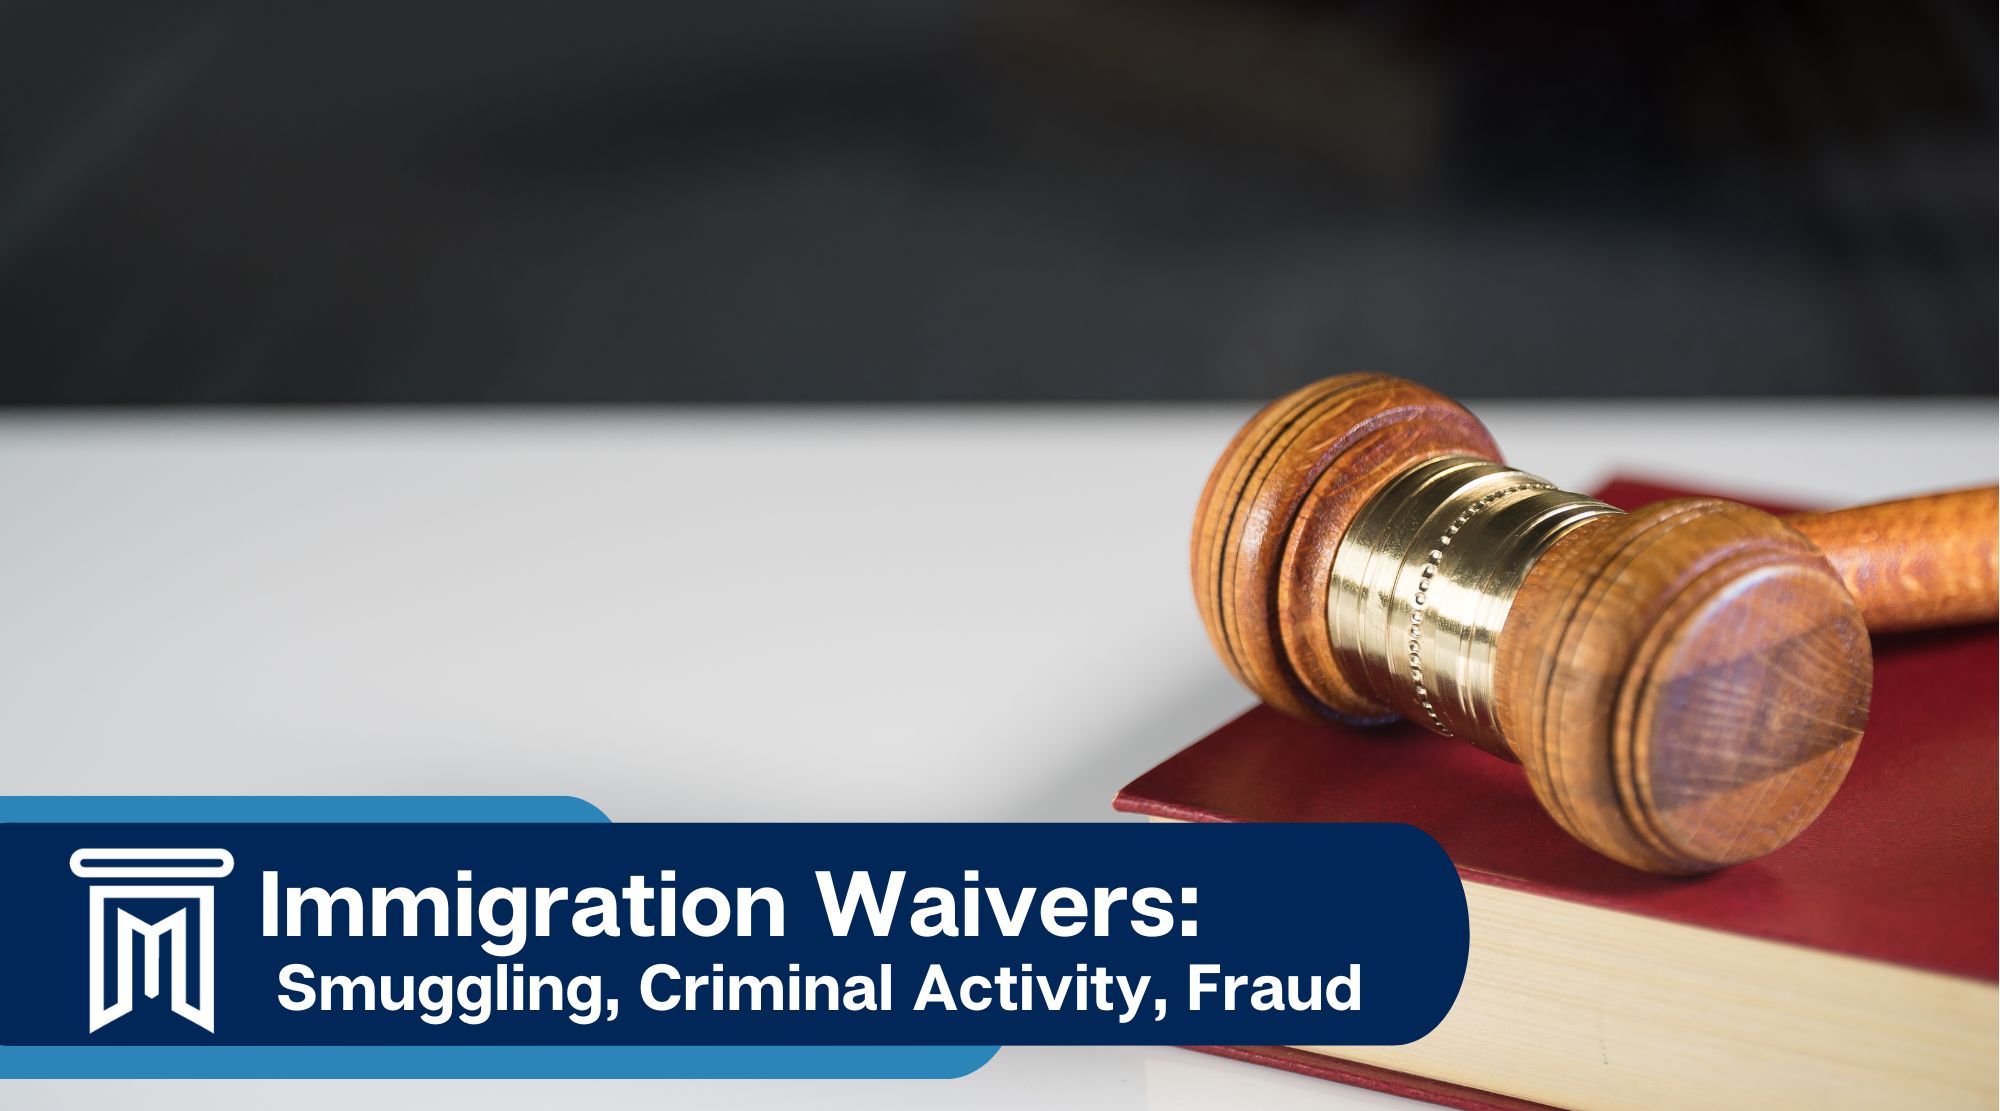 Immigration Waivers: smuggling, criminal activity, fraud